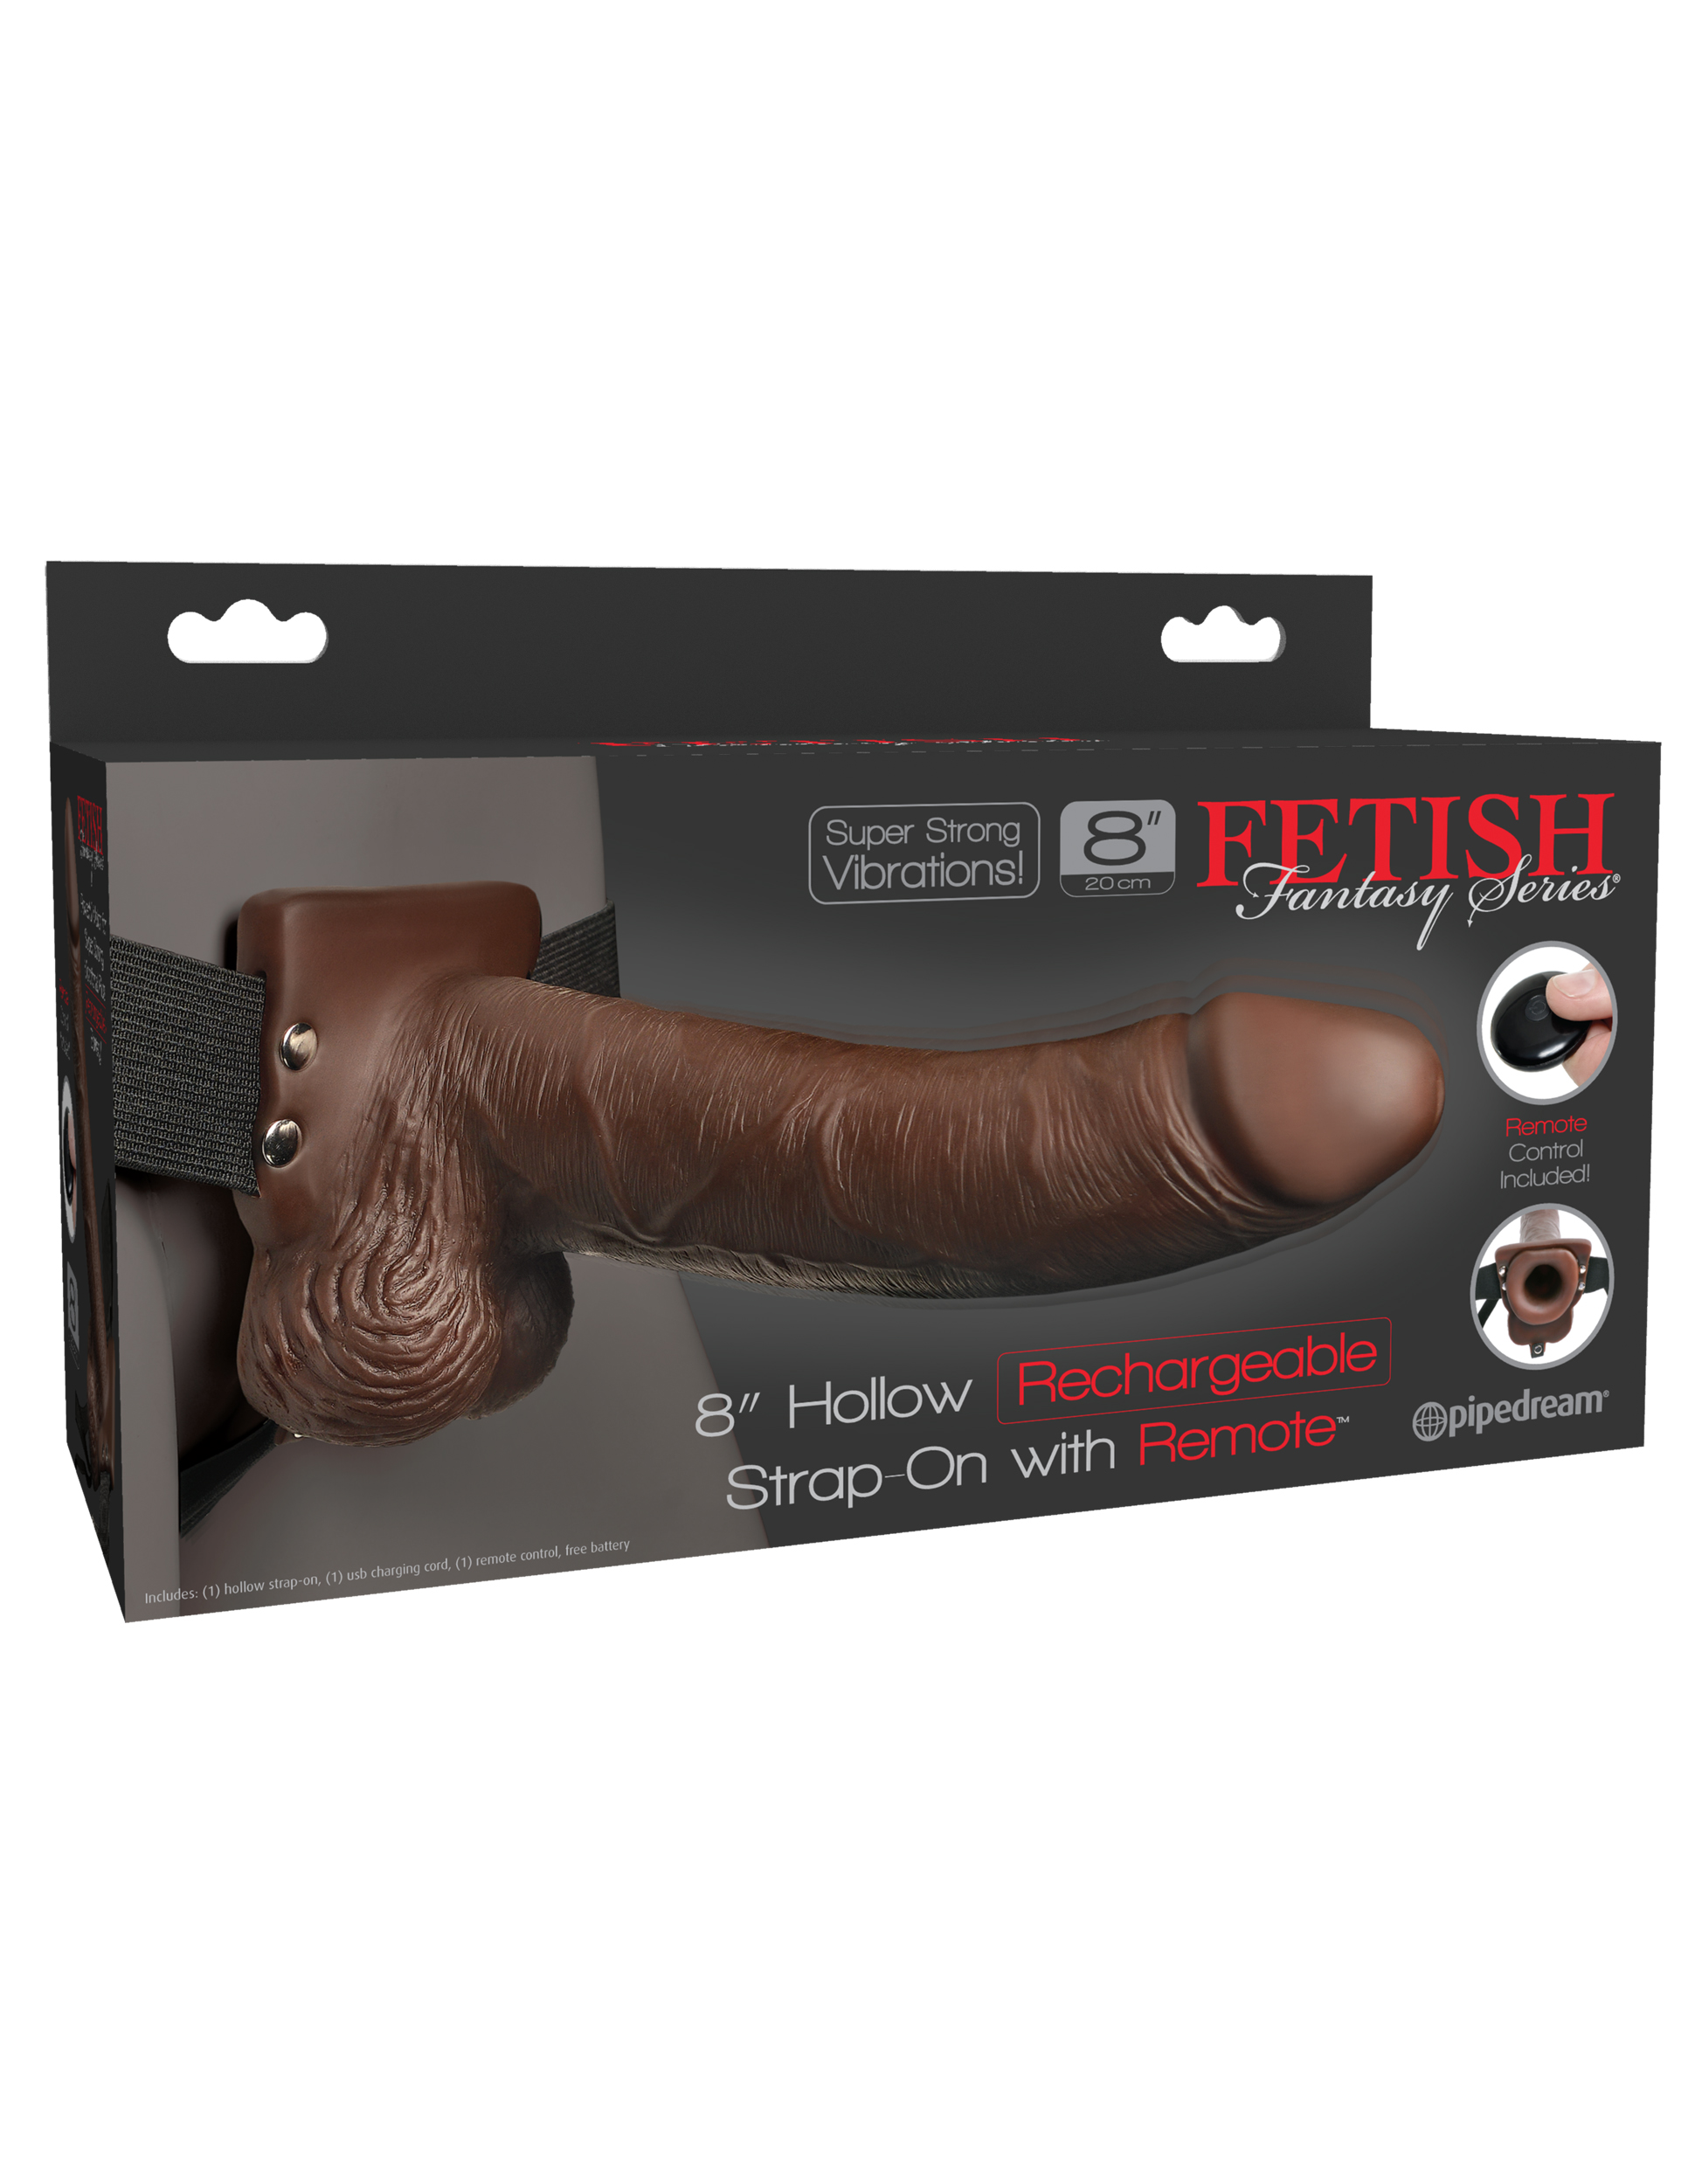 Image of ID 1347764389 Fetish Fantasy Series 8 Inch Hollow Rechargeable Strap-on With Remote - Brown